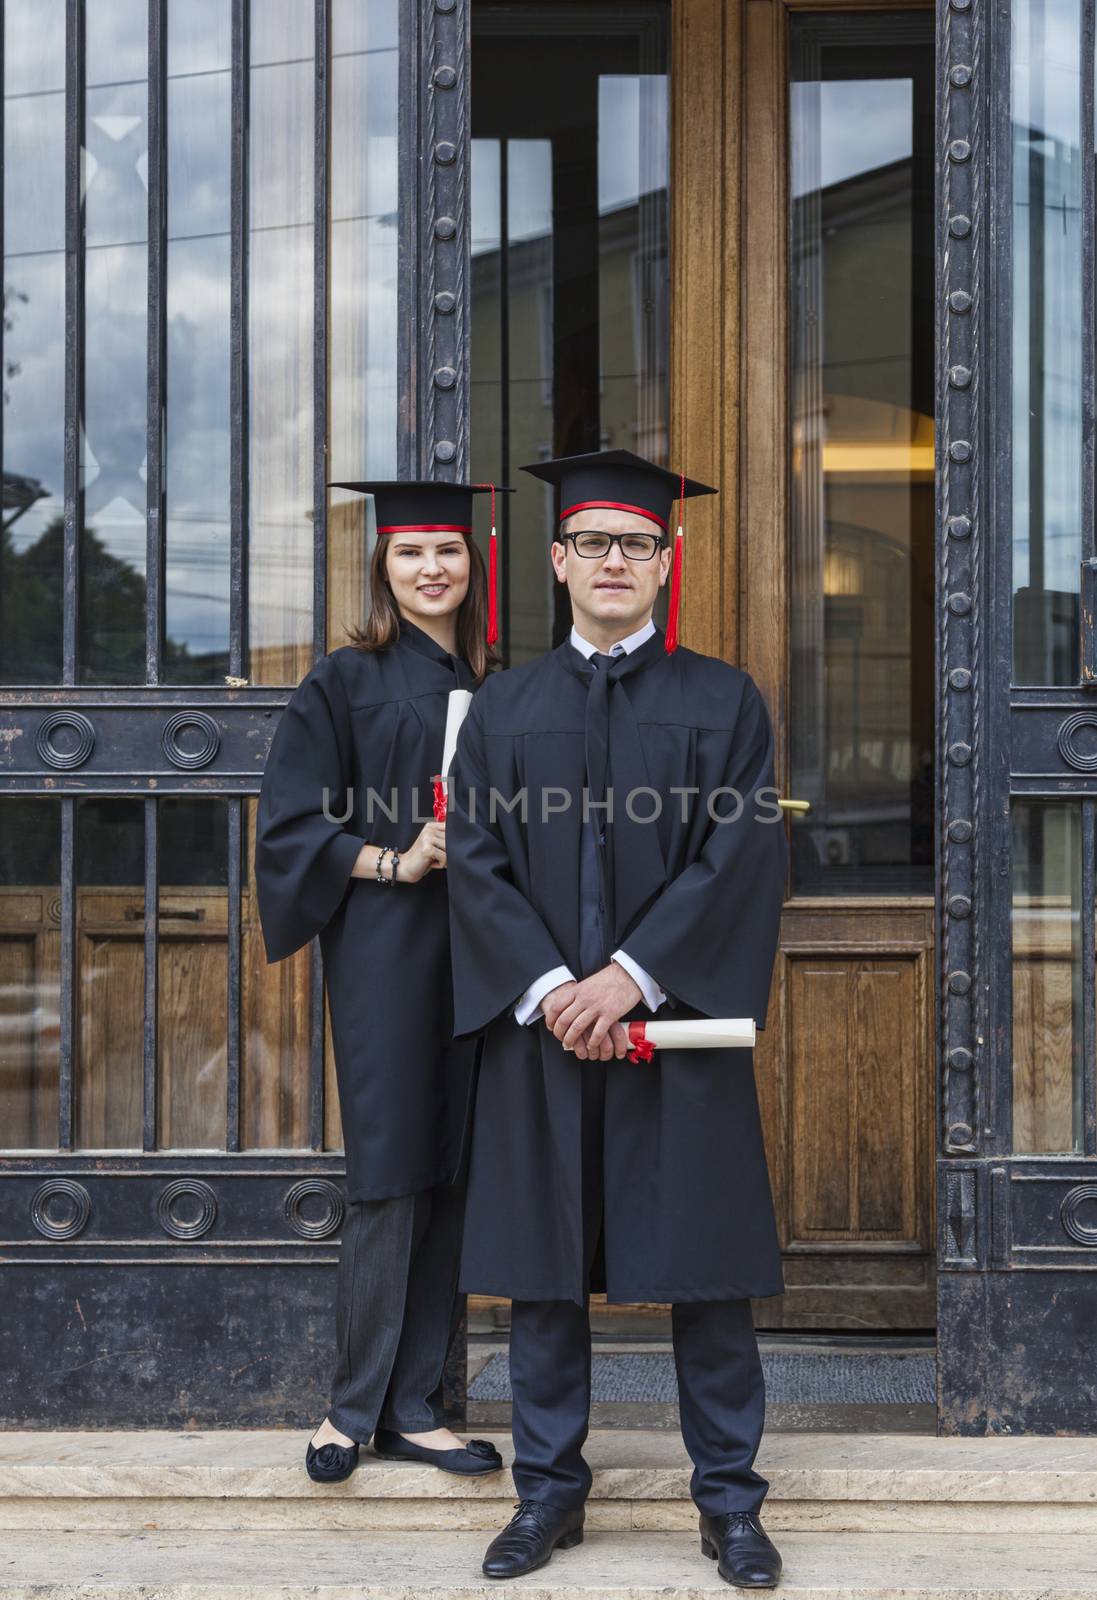 Couple in the Graduation Day by RazvanPhotography